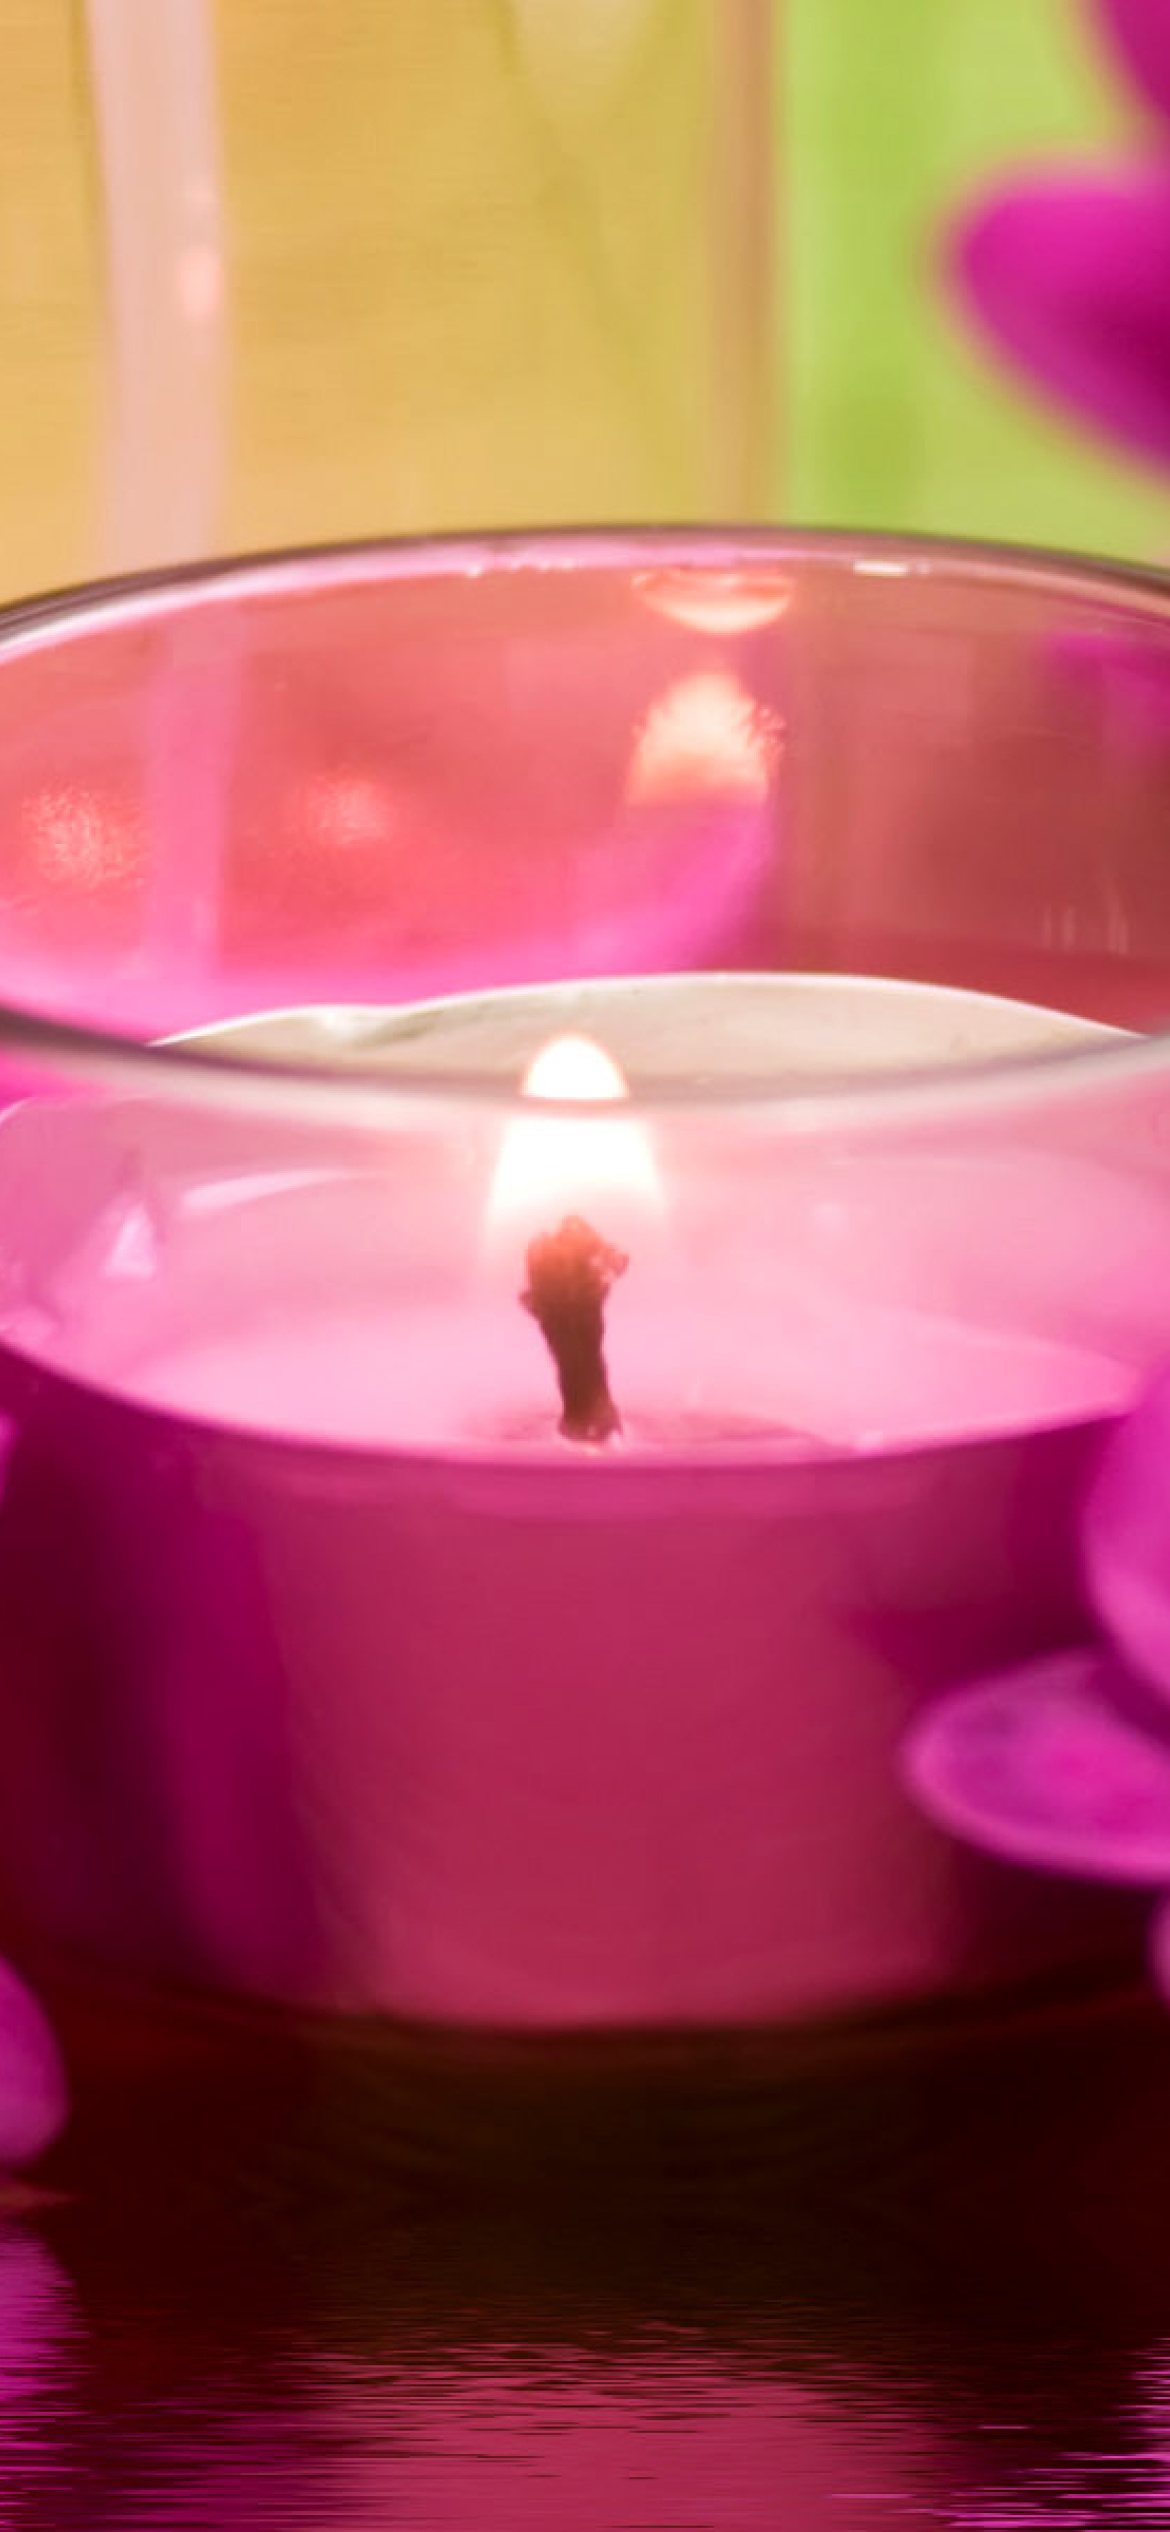 Violet Candle and Flowers wallpaper 1170x2532